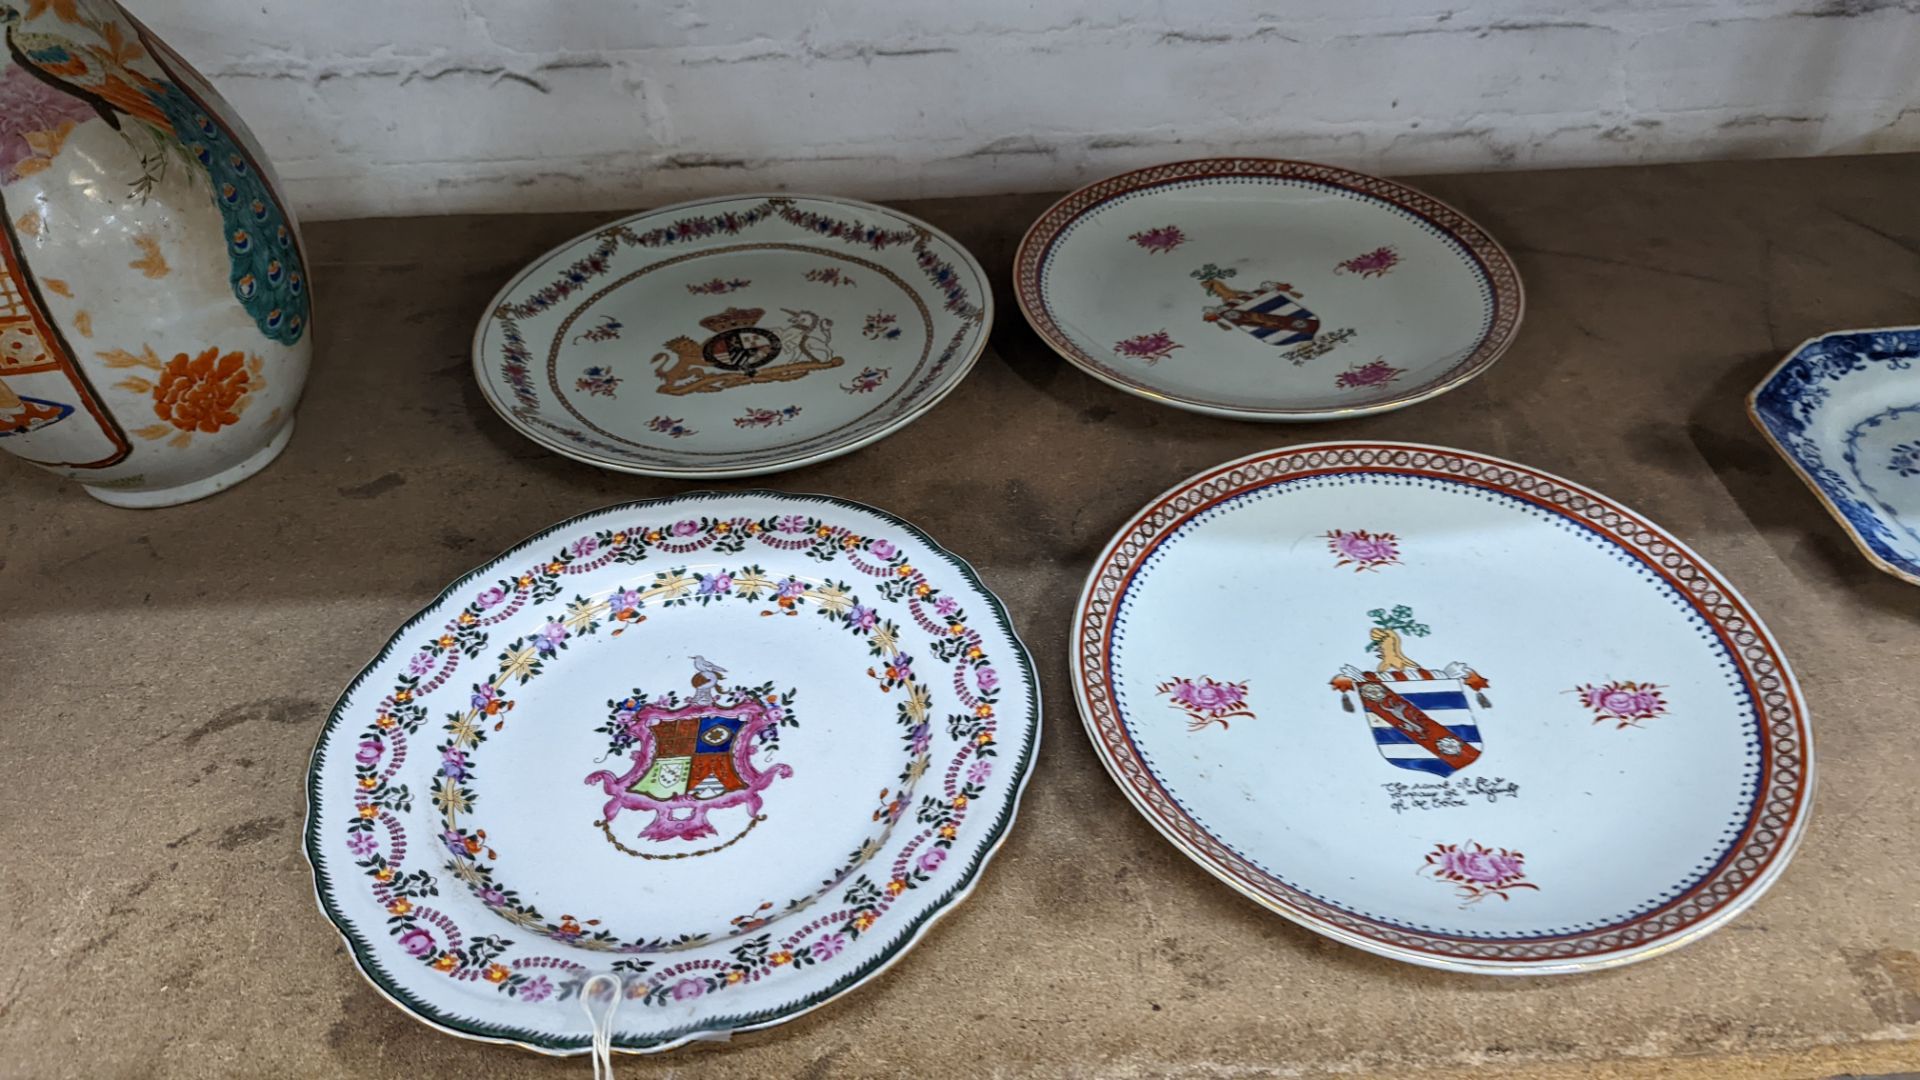 4 off modern Chinese plates, export style - Image 11 of 12